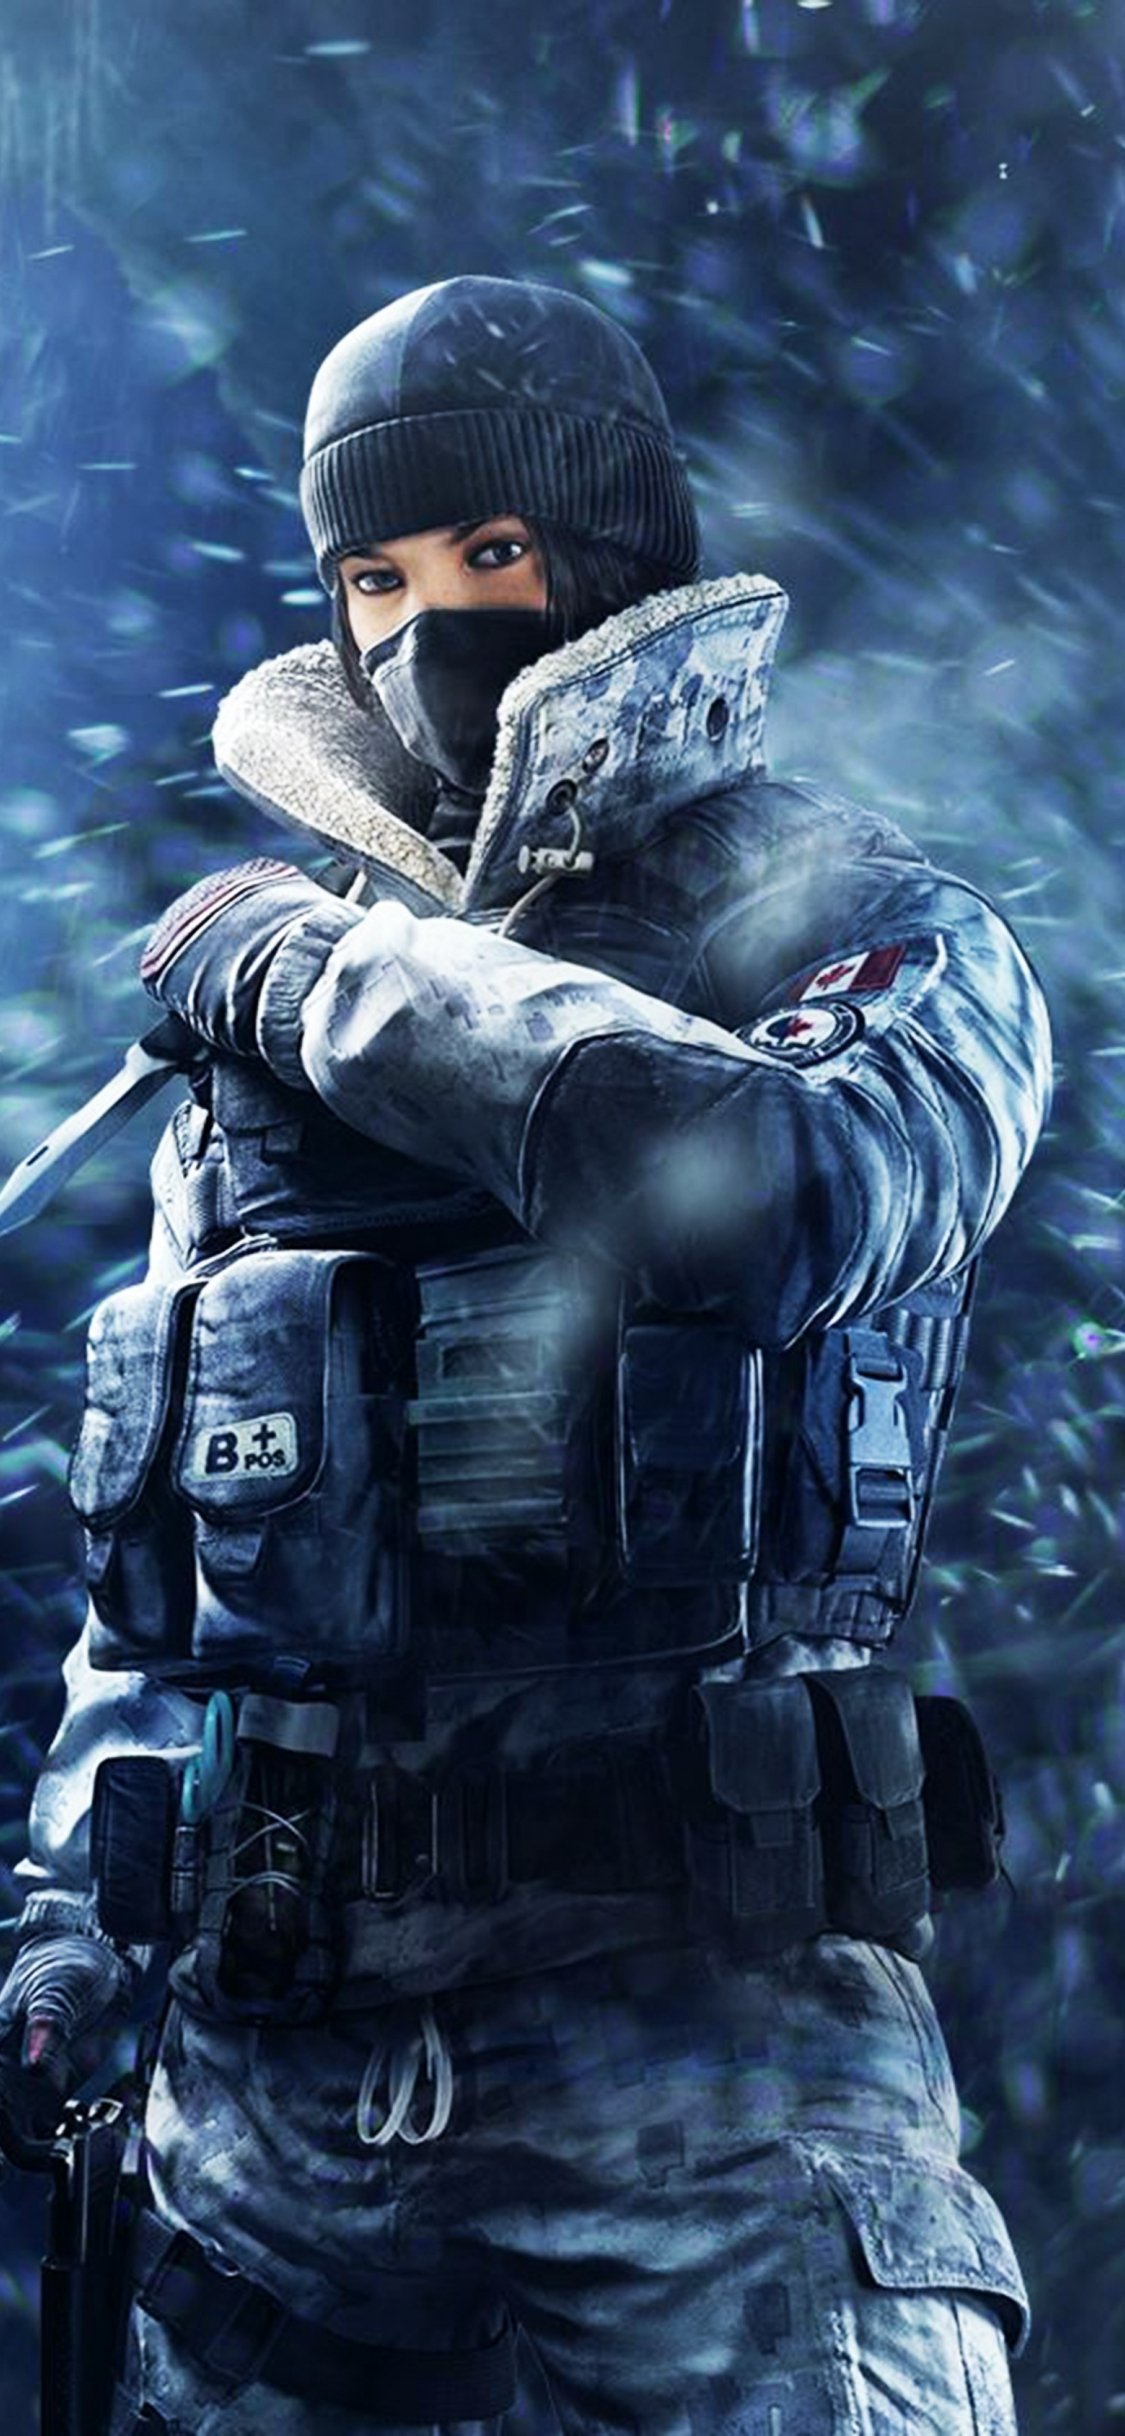 Download 1125x2436 Wallpaper Tom Clancy S Rainbow Six Siege Girl Soldier Frost Game Iphone X 1125x2436 Hd Image Background 860